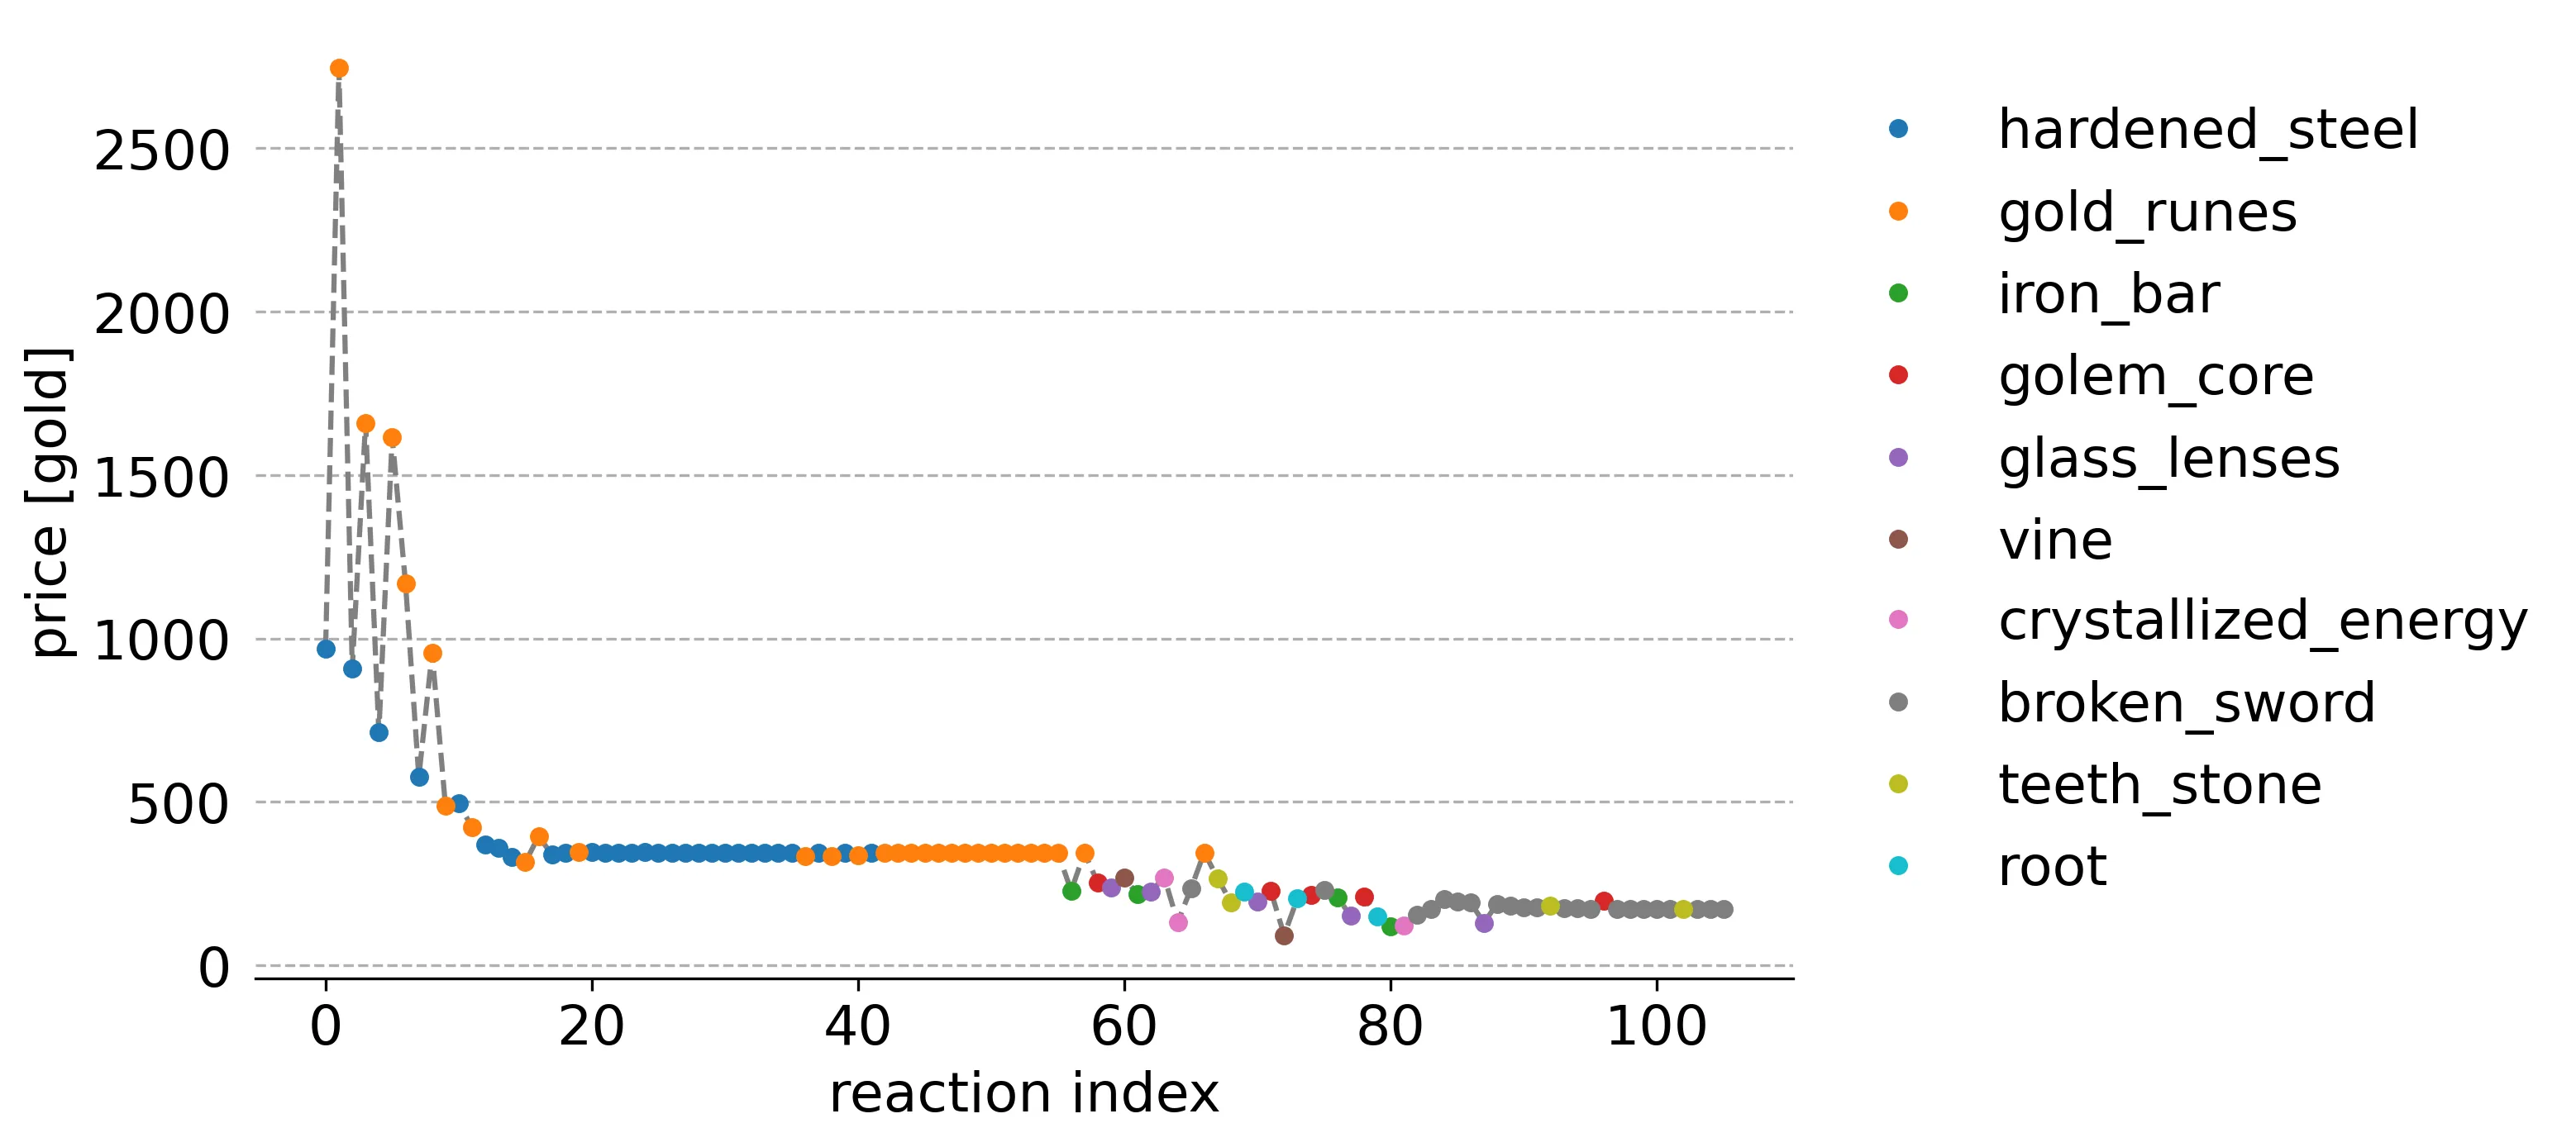 
    Price (y-value) and item (color) for each reaction (index is x-value) in order of all customer
    reactions for the first 105 reactions.
    Shows that all reactions are only to hardened steel and gold runes, which have the same highest
    ideal price.
    Presumably, those first 2 items are all sold off and reactions appear to randomly be from the
    other items.
    At some point most of the reactions are only to the broken sword item, which has leveled off to
    its ideal price.